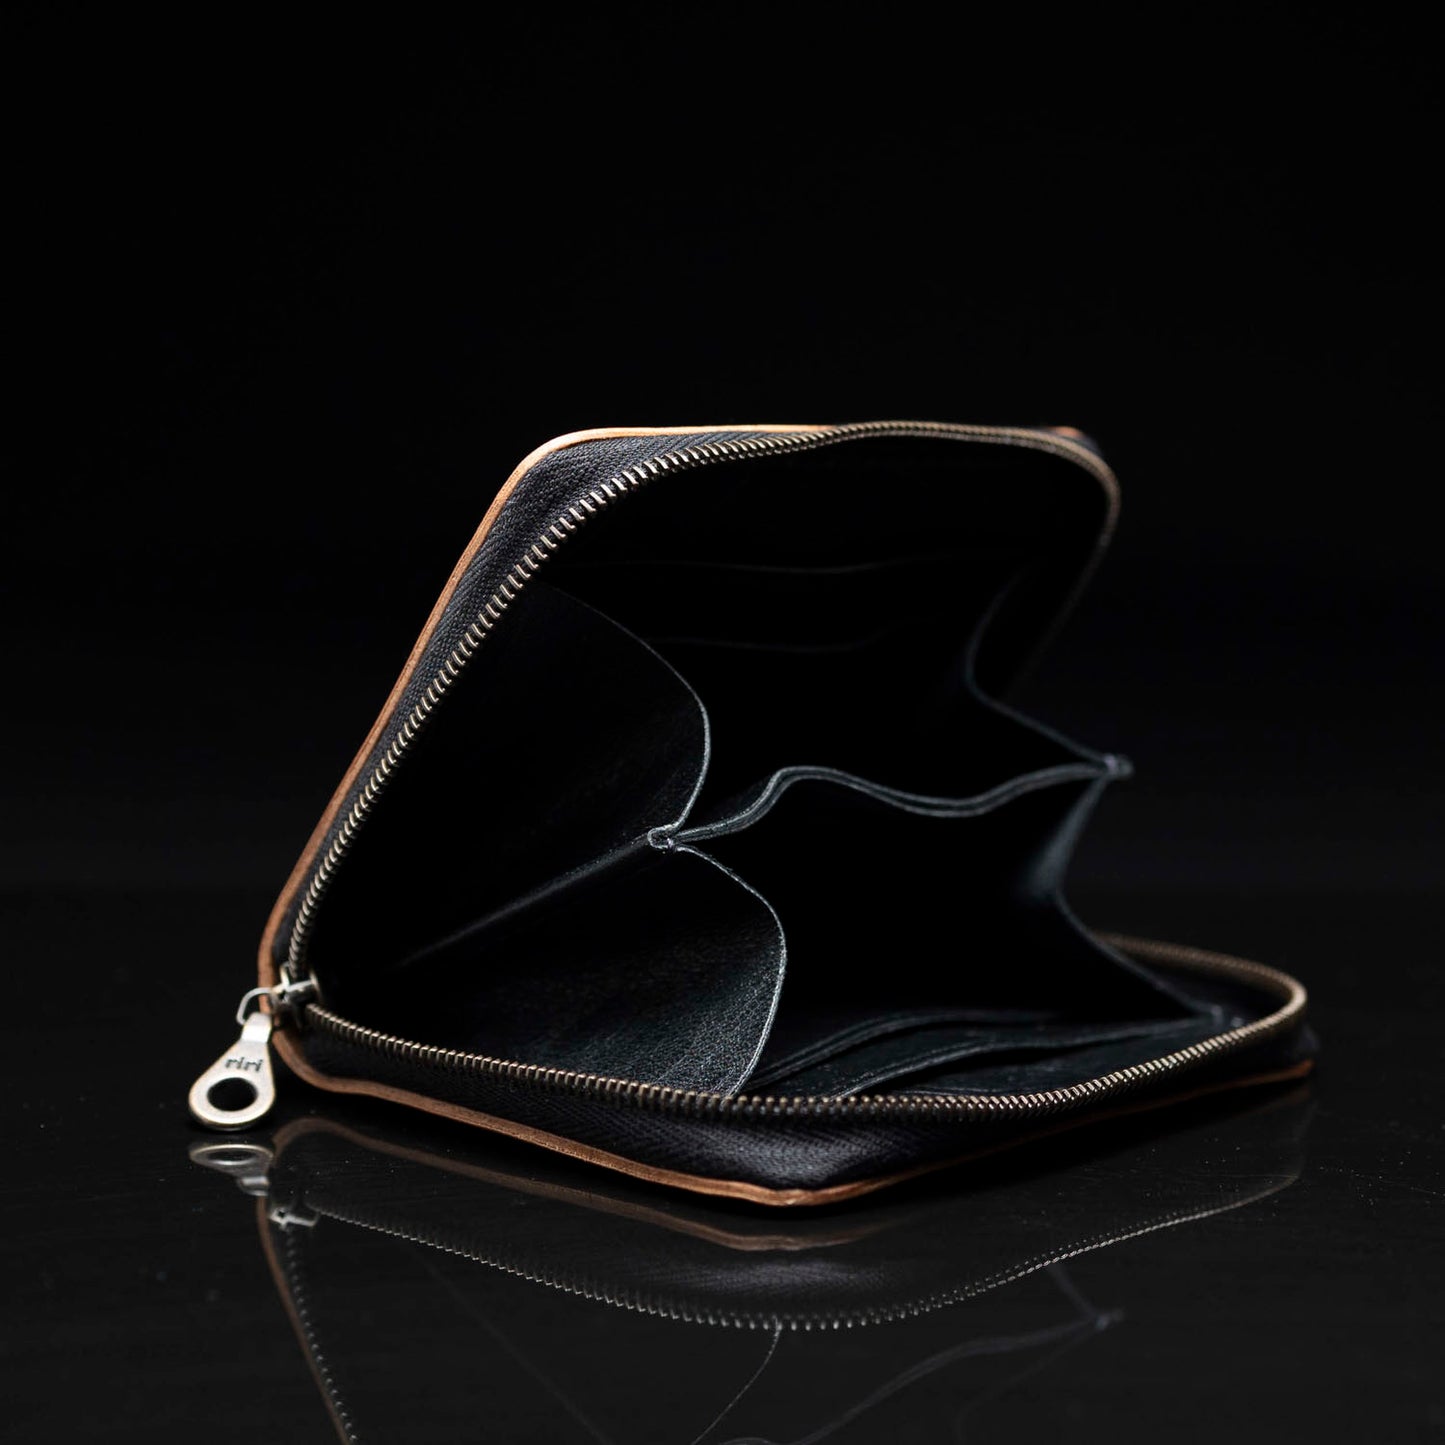 Private Stock Small Zip Wallet